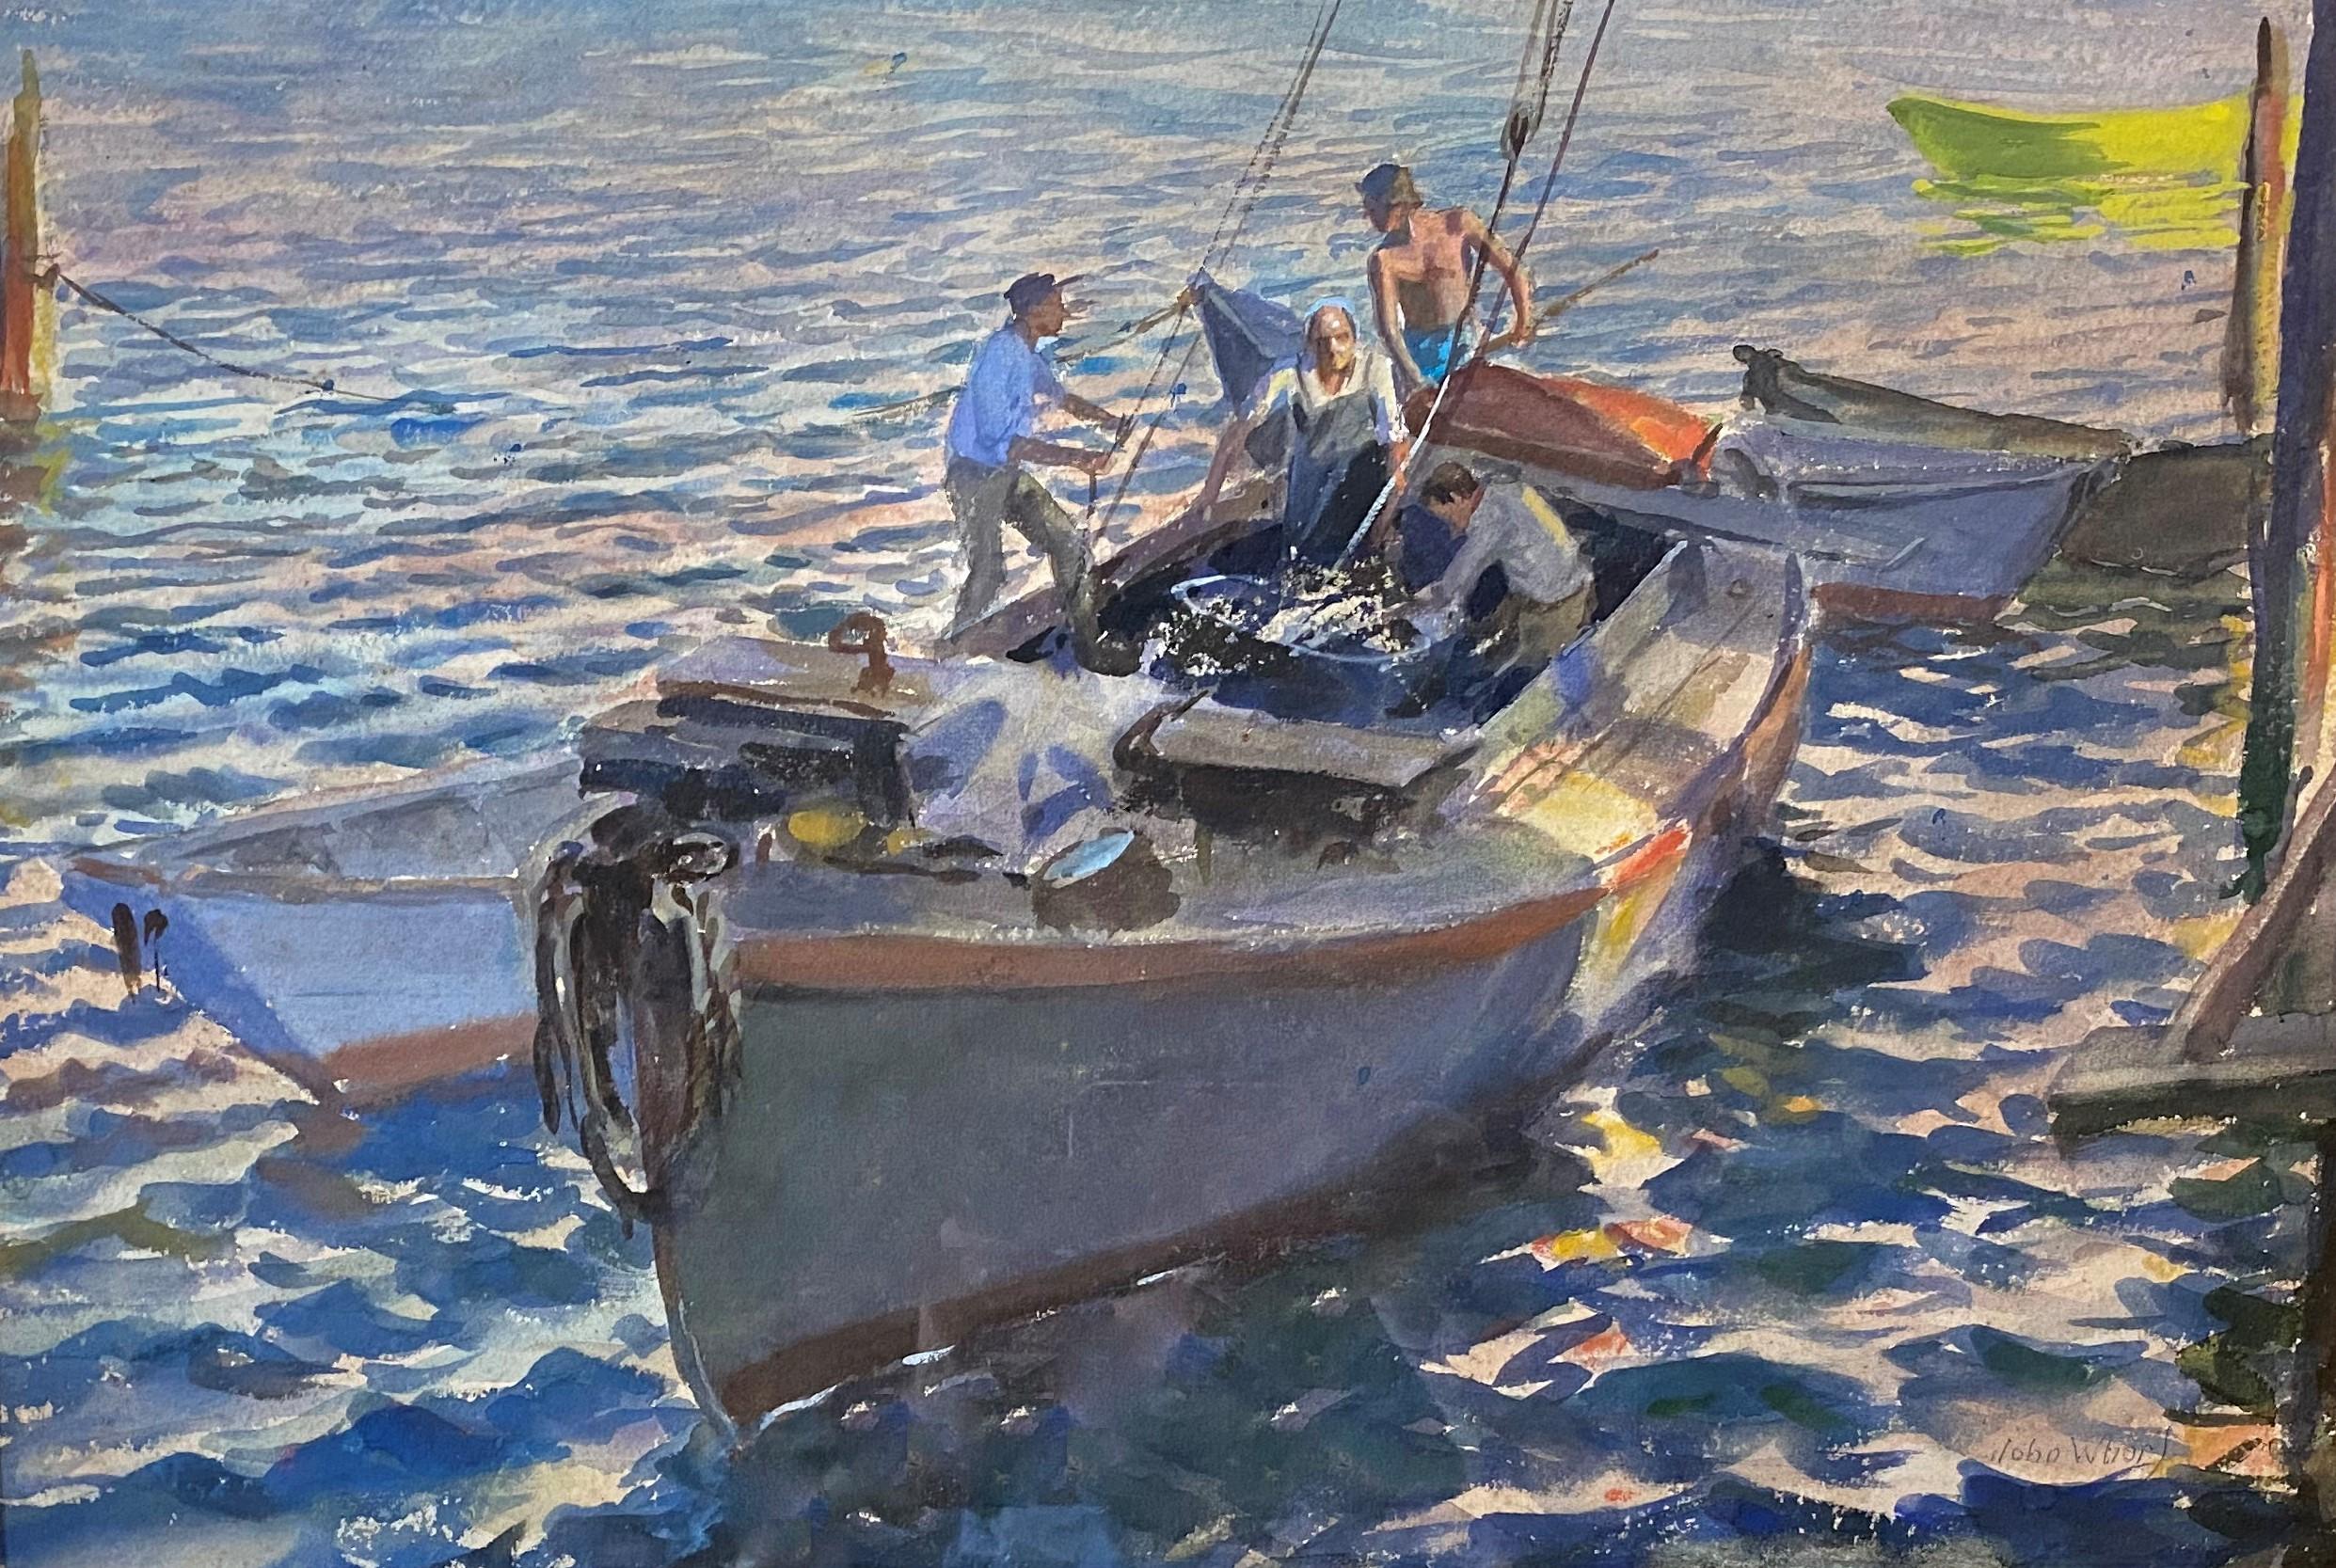 Bringing The Haul - Painting by John Whorf